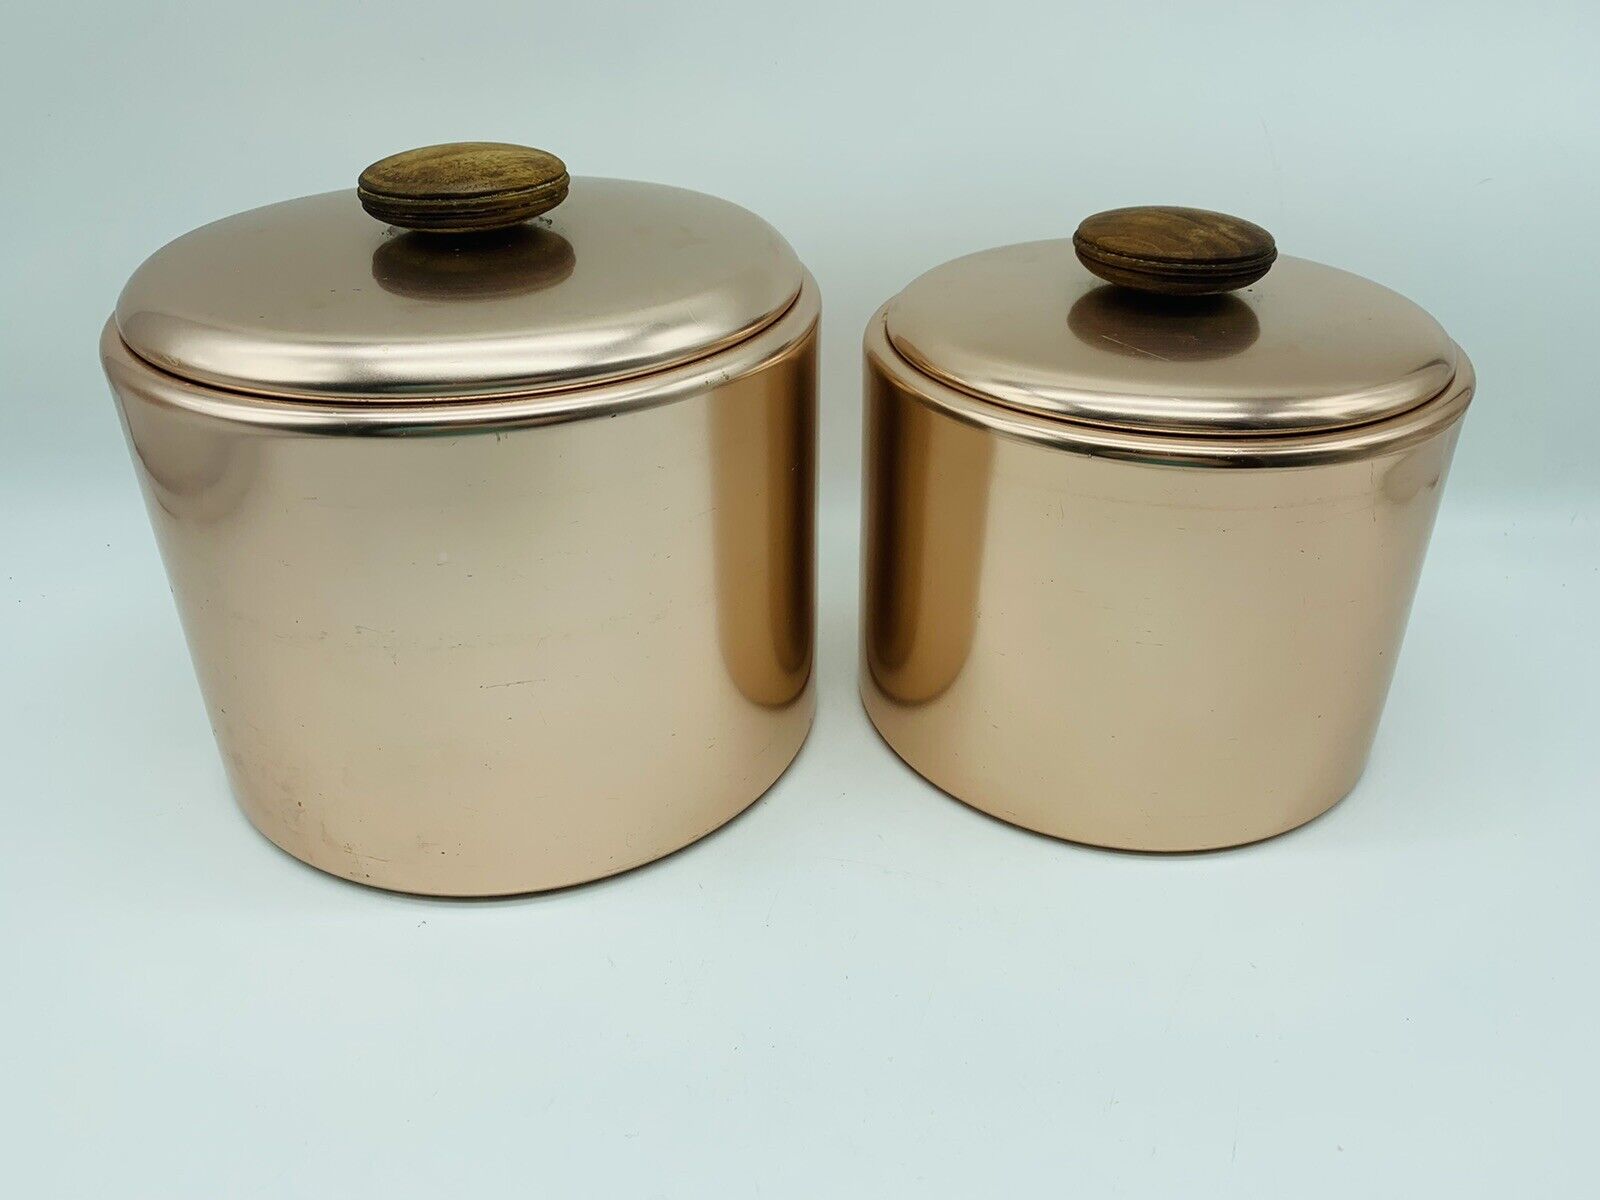 Vtg 50s Mirro Aluminum Copper Nesting Canister Lid Set (2) Wood Handle Anodized